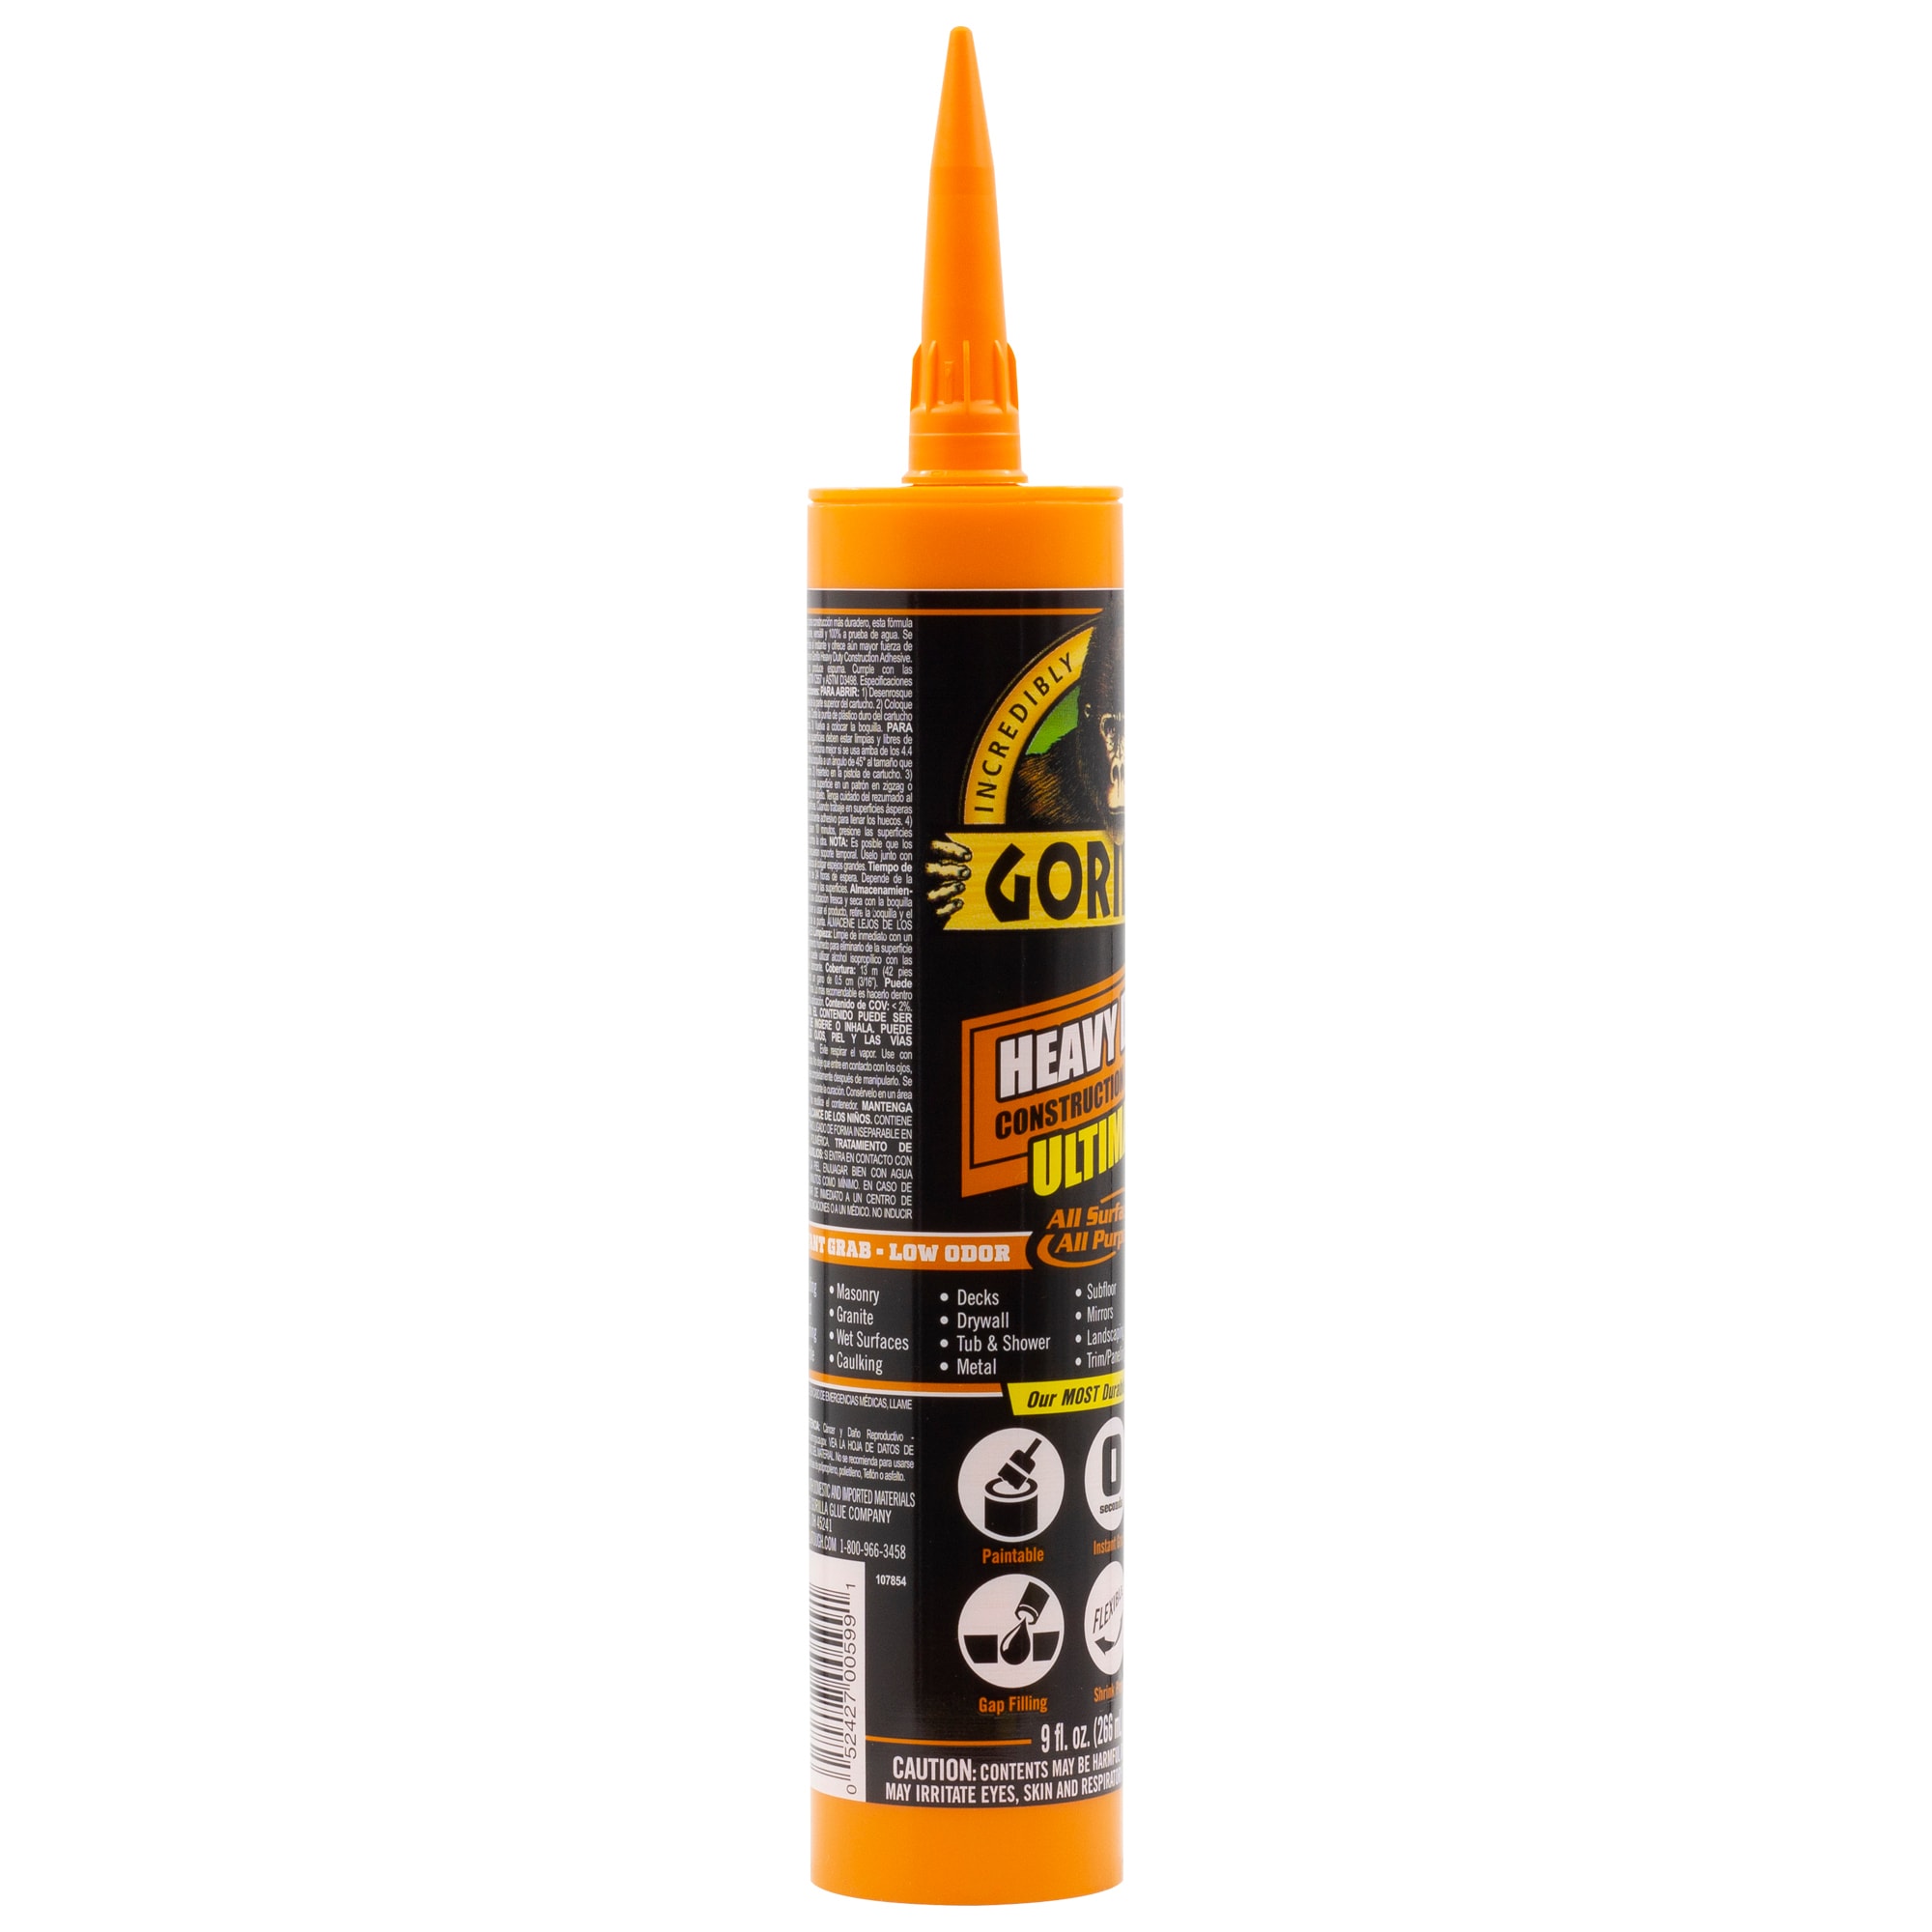 Gorilla 8020002 Heavy Duty Construction Adhesive With Tip 30 Second Hold  Waterproof Gap Filling Paintable All Weather Glue 2.5 Oz Tube White, 6-Pack  